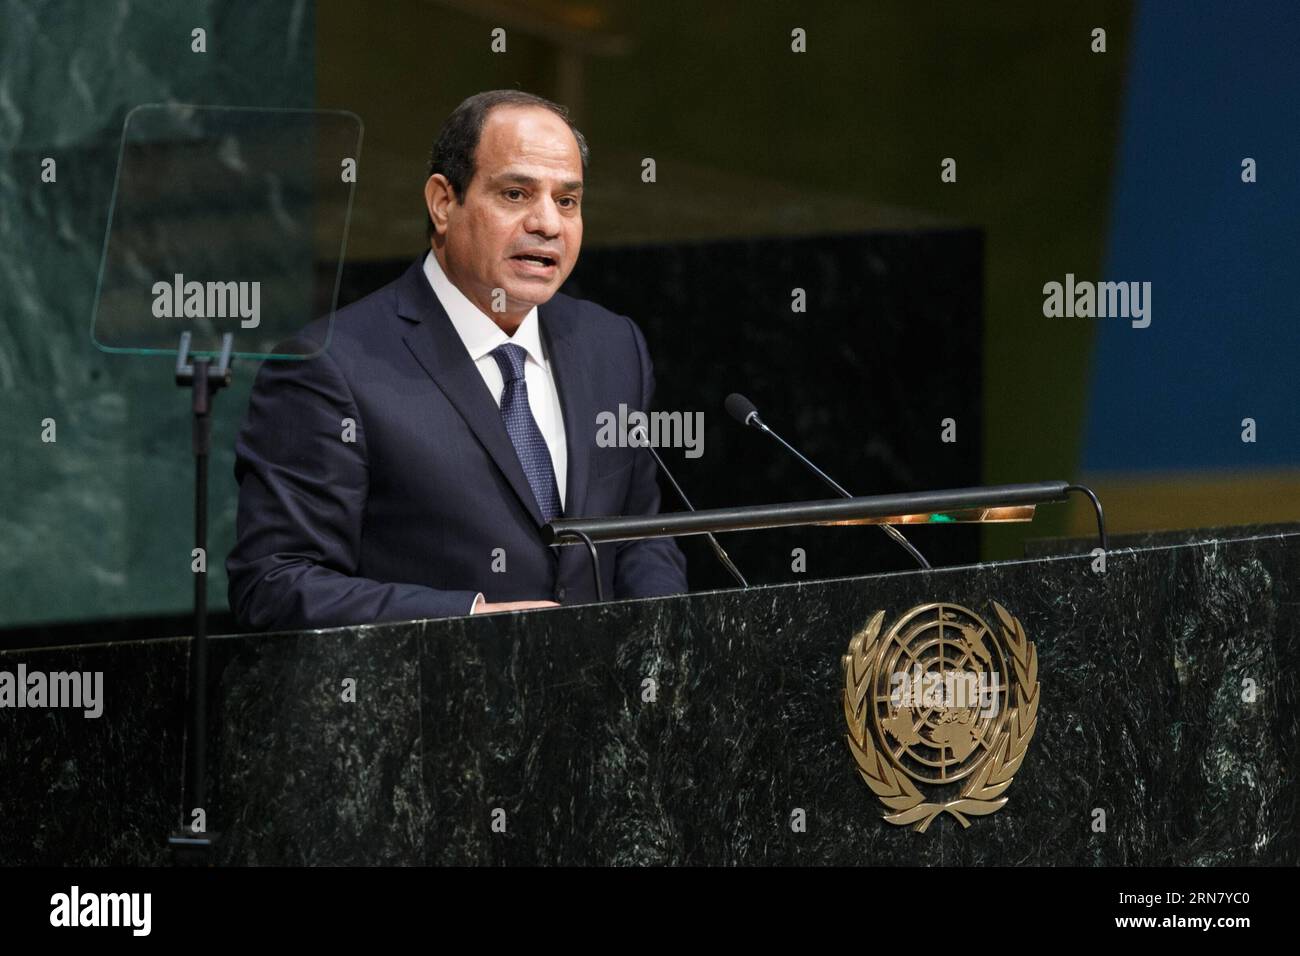 (150925) -- NEW YORK, Sept. 25, 2015 -- Egyptian President Abdel-Fattah al-Sisi addresses the Sustainable Development Summit at United Nations headquarters in New York, Sept. 25, 2015. A momentous sustainable development agenda, which charts a new era of sustainable development until 2030, was adopted on Friday by 193 UN member states at the UN Sustainable Development Summit at the UN headquarters in New York. ) UN-NEW YORK-SUSTAINABLE DEVELOPMENT SUMMIT-AGENDA-ADOPTED LixMuzi PUBLICATIONxNOTxINxCHN   New York Sept 25 2015 Egyptian President Abdel Fattah Al Sisi addresses The Sustainable Devel Stock Photo